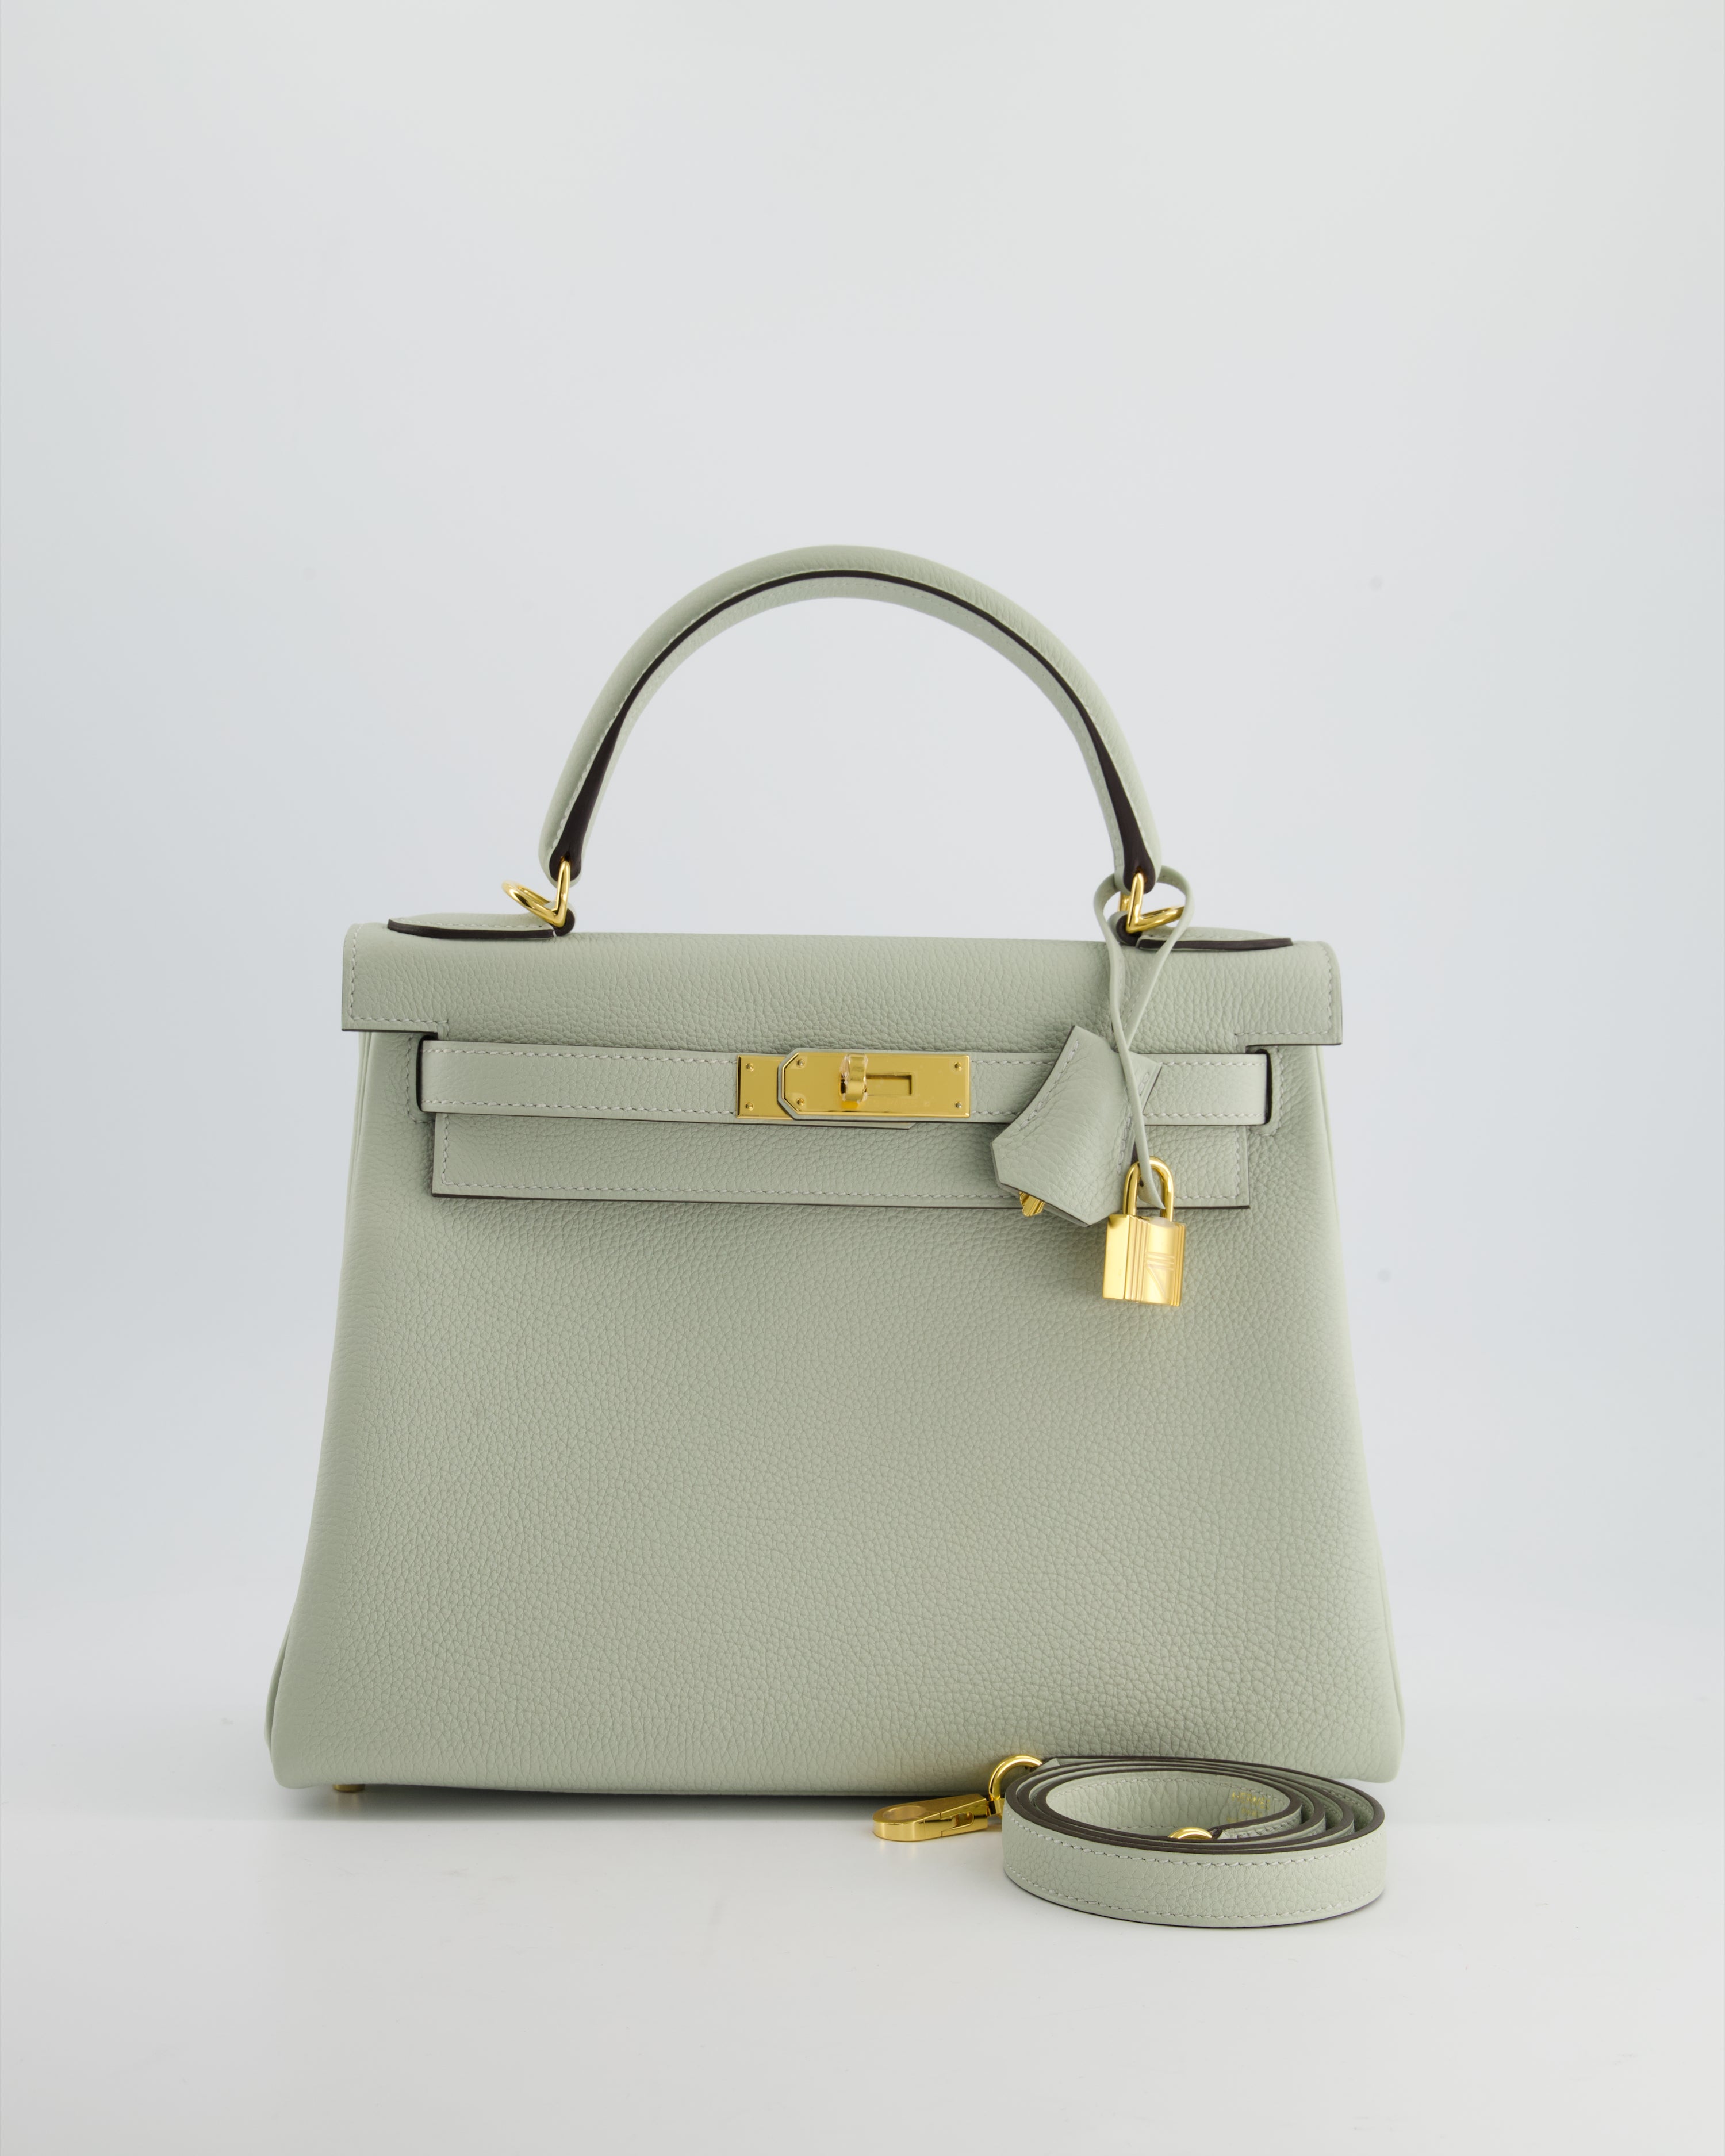 Hermès Kelly 28cm Retourne in Gris Neve Togo Leather with Gold 